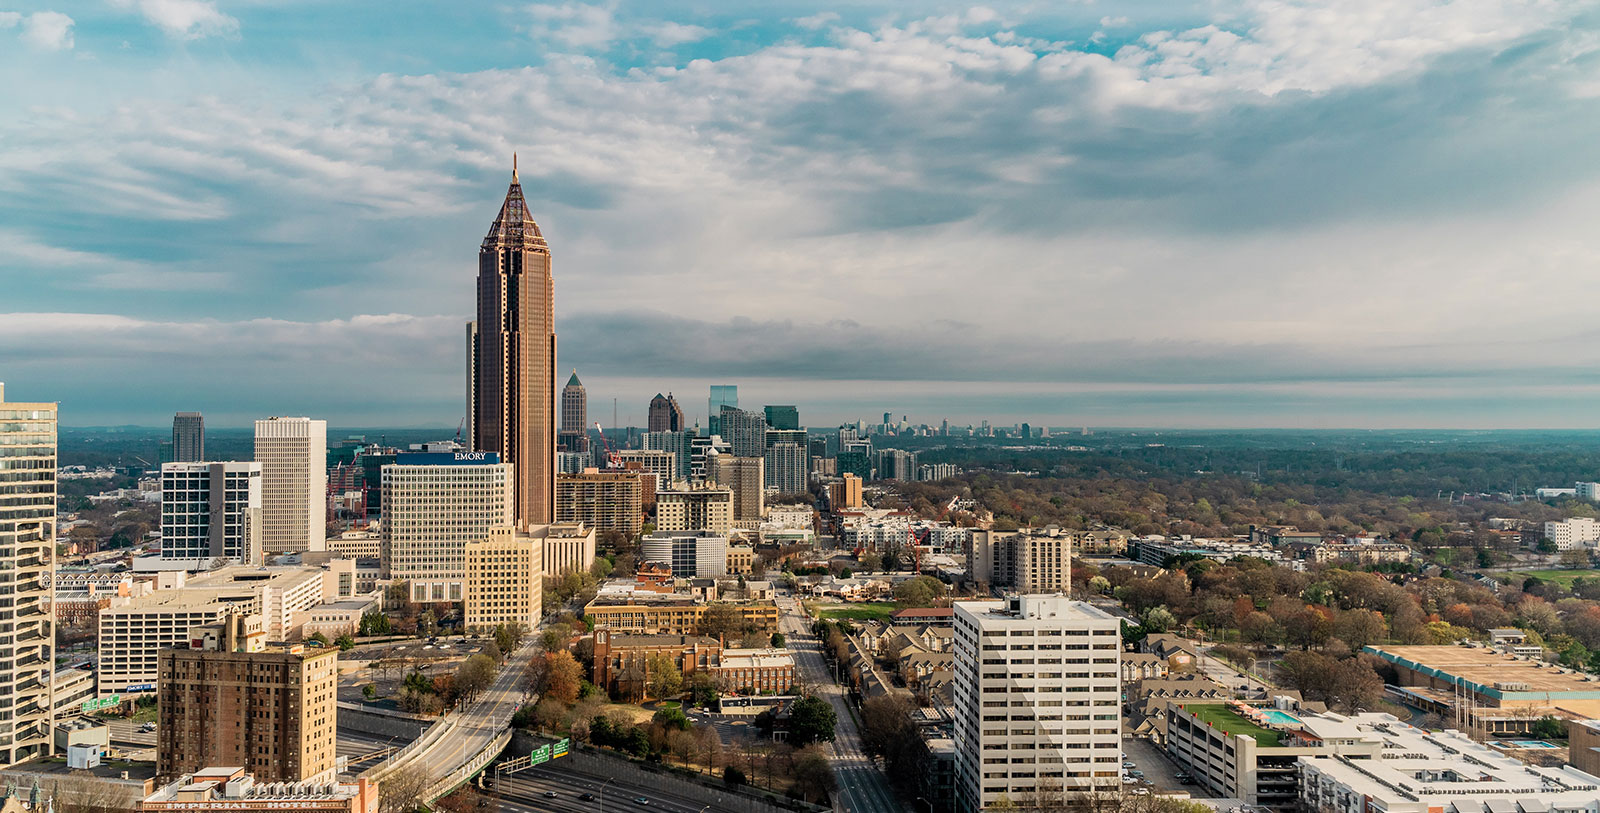 Discover the exciting attractions along Peachtree Road in Atlanta’s Midtown district.